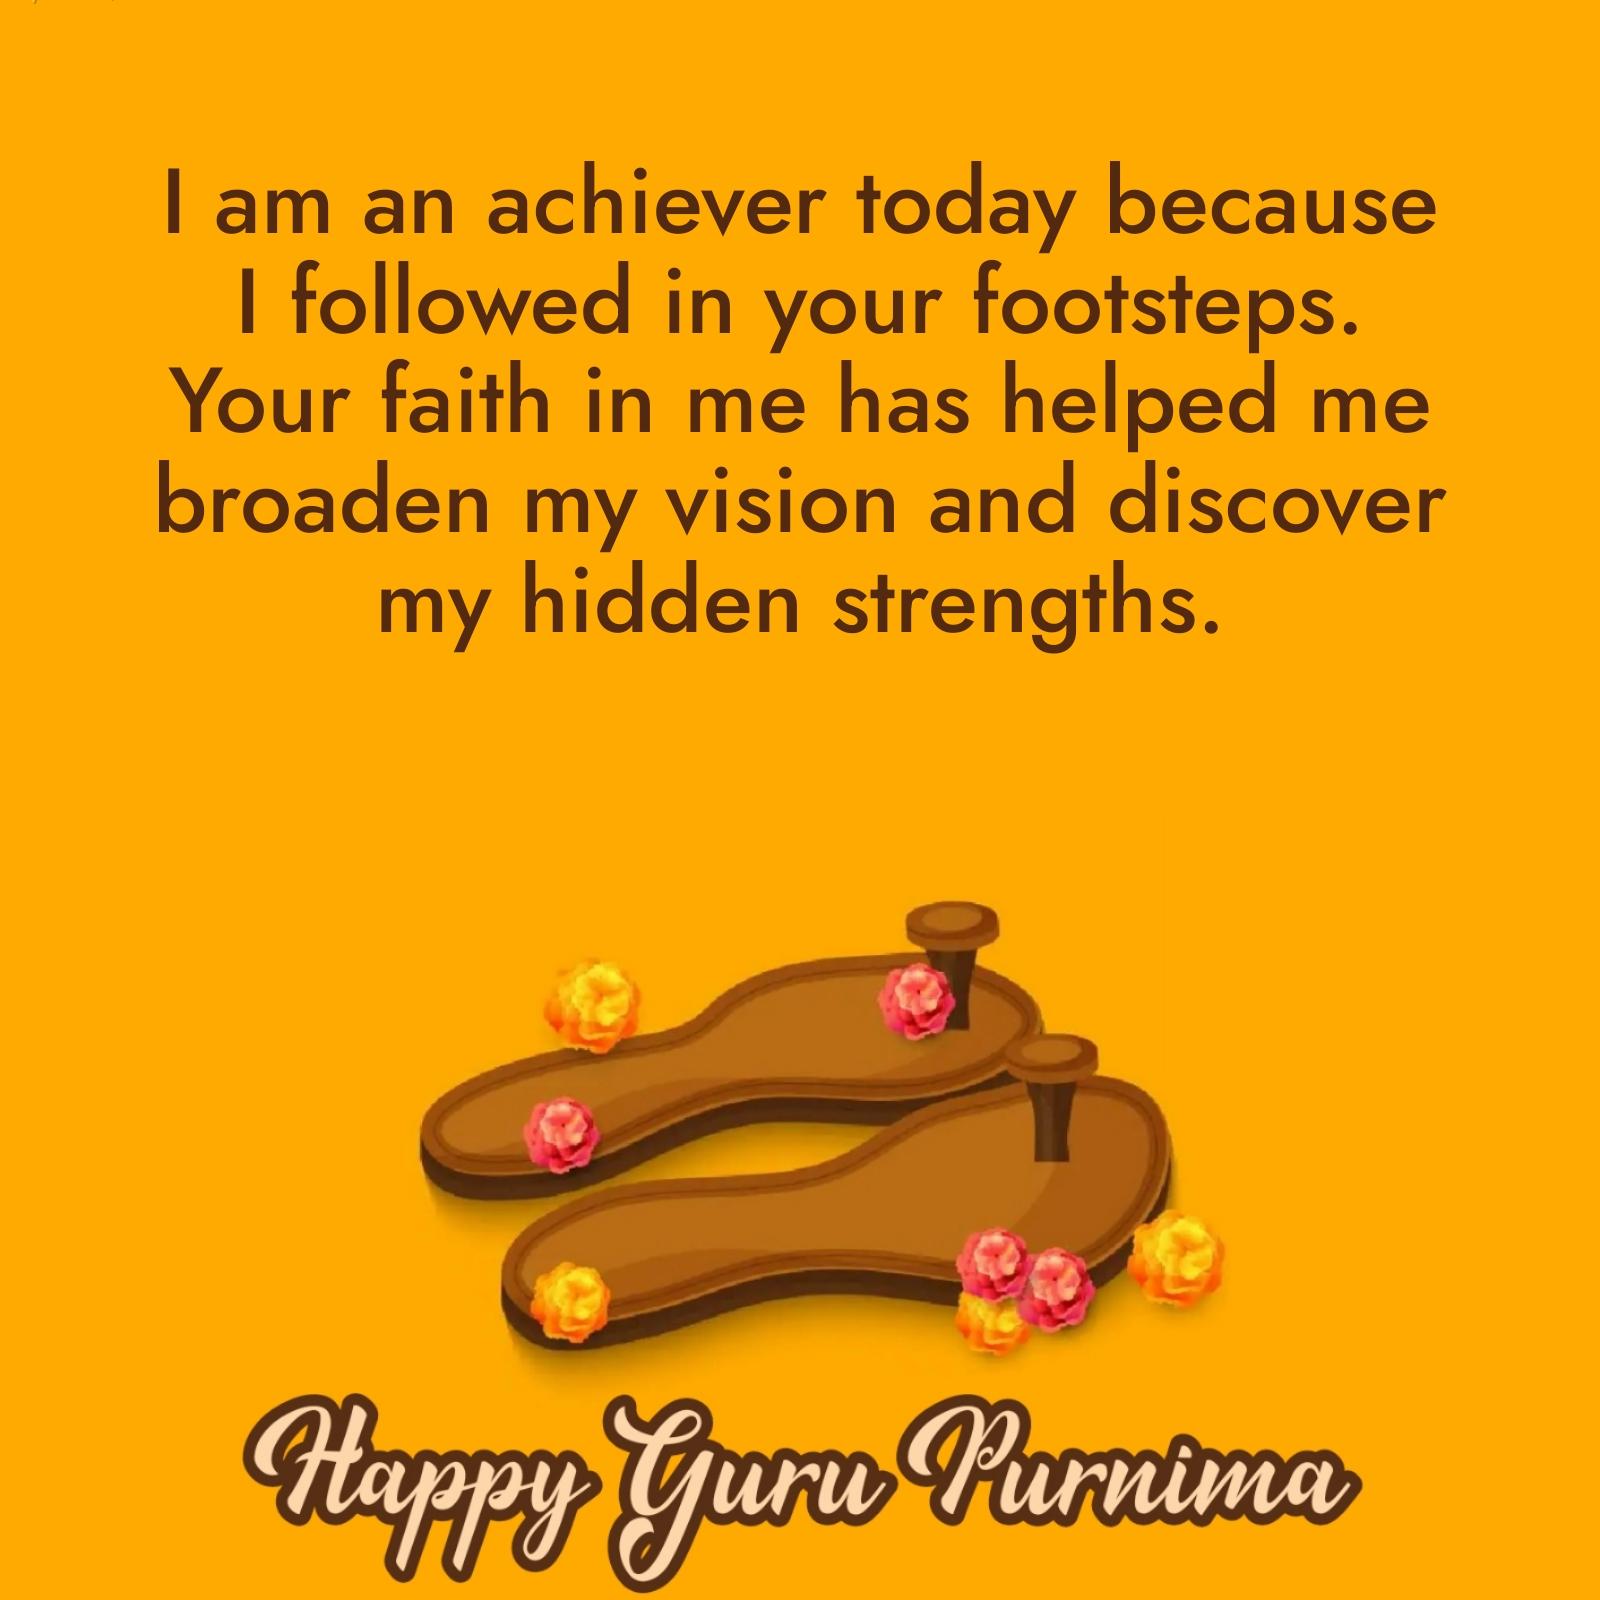 I am an achiever today because I followed in your footsteps